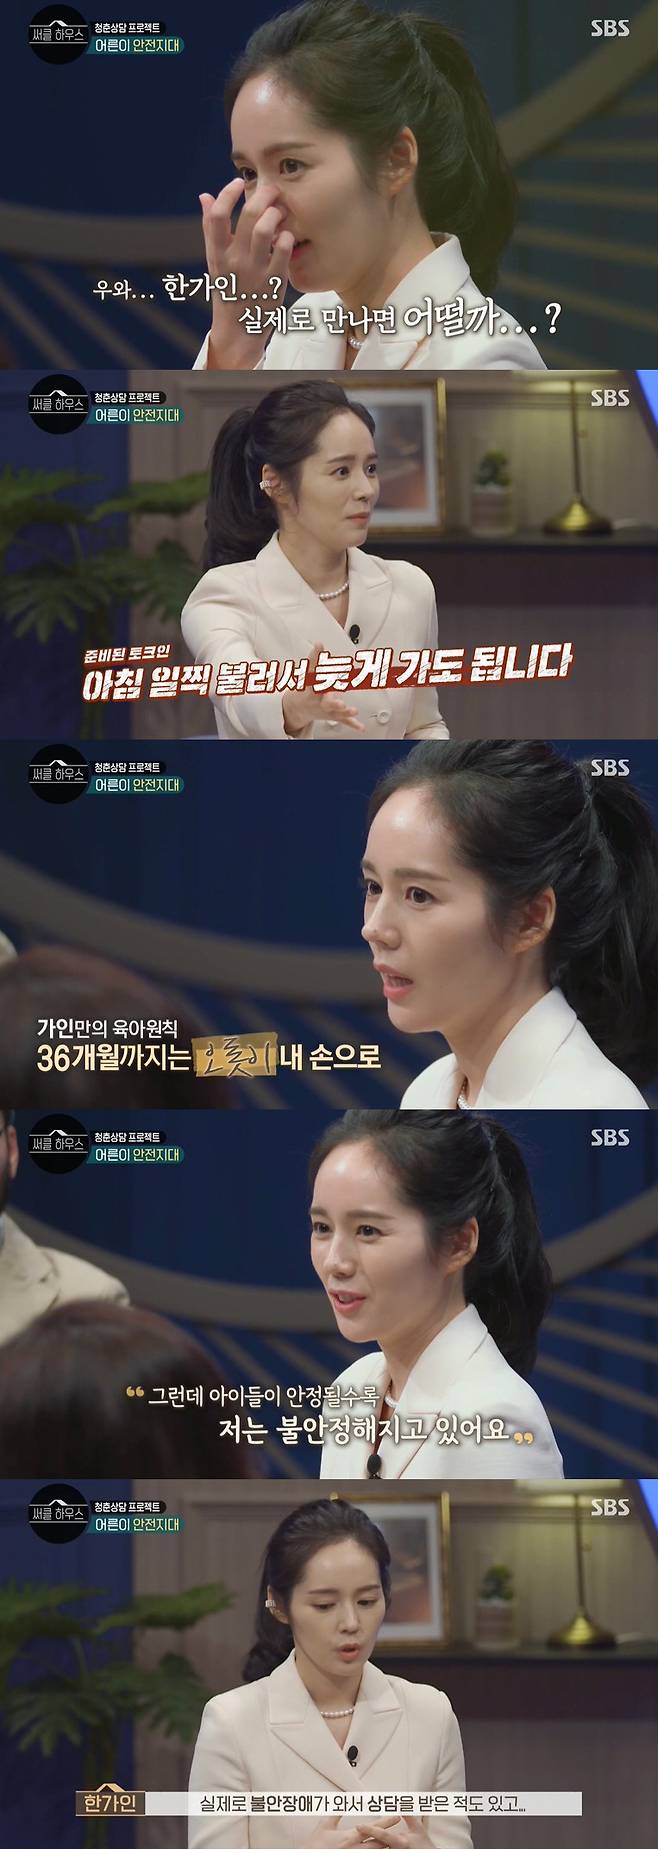 circle house Han Ga-in has confessed to suffering from anxiety disorder during the hiatus.On SBS circle house broadcasted on the 24th, Han Ga-in, which we did not know, was revealed.Lee Seung-gi said of Han Ga-in, When I met Han Ga-in, I wanted to say, Wow, Han Ga-in? But the problem was that we were being deceived.I do not have a chat from the time I eat, but I want to make the recording as long as possible because I asked why I came out. Han Ga-in said, I do not want to go home. I can call early in the morning and go late. It was a rule to raise my hand unconditionally until 36 months.Fortunately, it is a job that can control things. There are many mothers who do not want to do it. However, the child-rearing of Han Ga-in was not easy: In fact, the more attachment I had with my child and the more stable I became unstable.In fact, I have been consulted because of anxiety disorder. There were many laughter and Settai, but at some point the number of words decreased.I have nothing to do but talk about dinosaurs because I talk to my child. Han Ga-in, who had not had children for 11 years after marriage, was a couples Choices, but the Fathers Affair followed and hurt the related search.Han Ga-in said: I felt like I was too young to be responsible.So I did not have it after consulting my husband.  (I did) Fathers Affair followed me in the related search term, even though I never tried to have a child.I was happy to have a child with my Choices, but it was not good because of peoples attention. Han Ga-in offered warm advice based on his own experience to a client who Choices non-love with a wound of his fathers affair; Han Ga-in said: I sympathize.I had a hard time because I did not have a happy childhood. My heart about my father is not hate. I do not hate it myself and I am insensitive.I lived in such a family, so it seemed so good when I went to my husbands house. Han Ga-in said, I wanted to be a member of the family because I got married early. I am too healed when I see my husband taking care of my child.There are times when I have tears. 